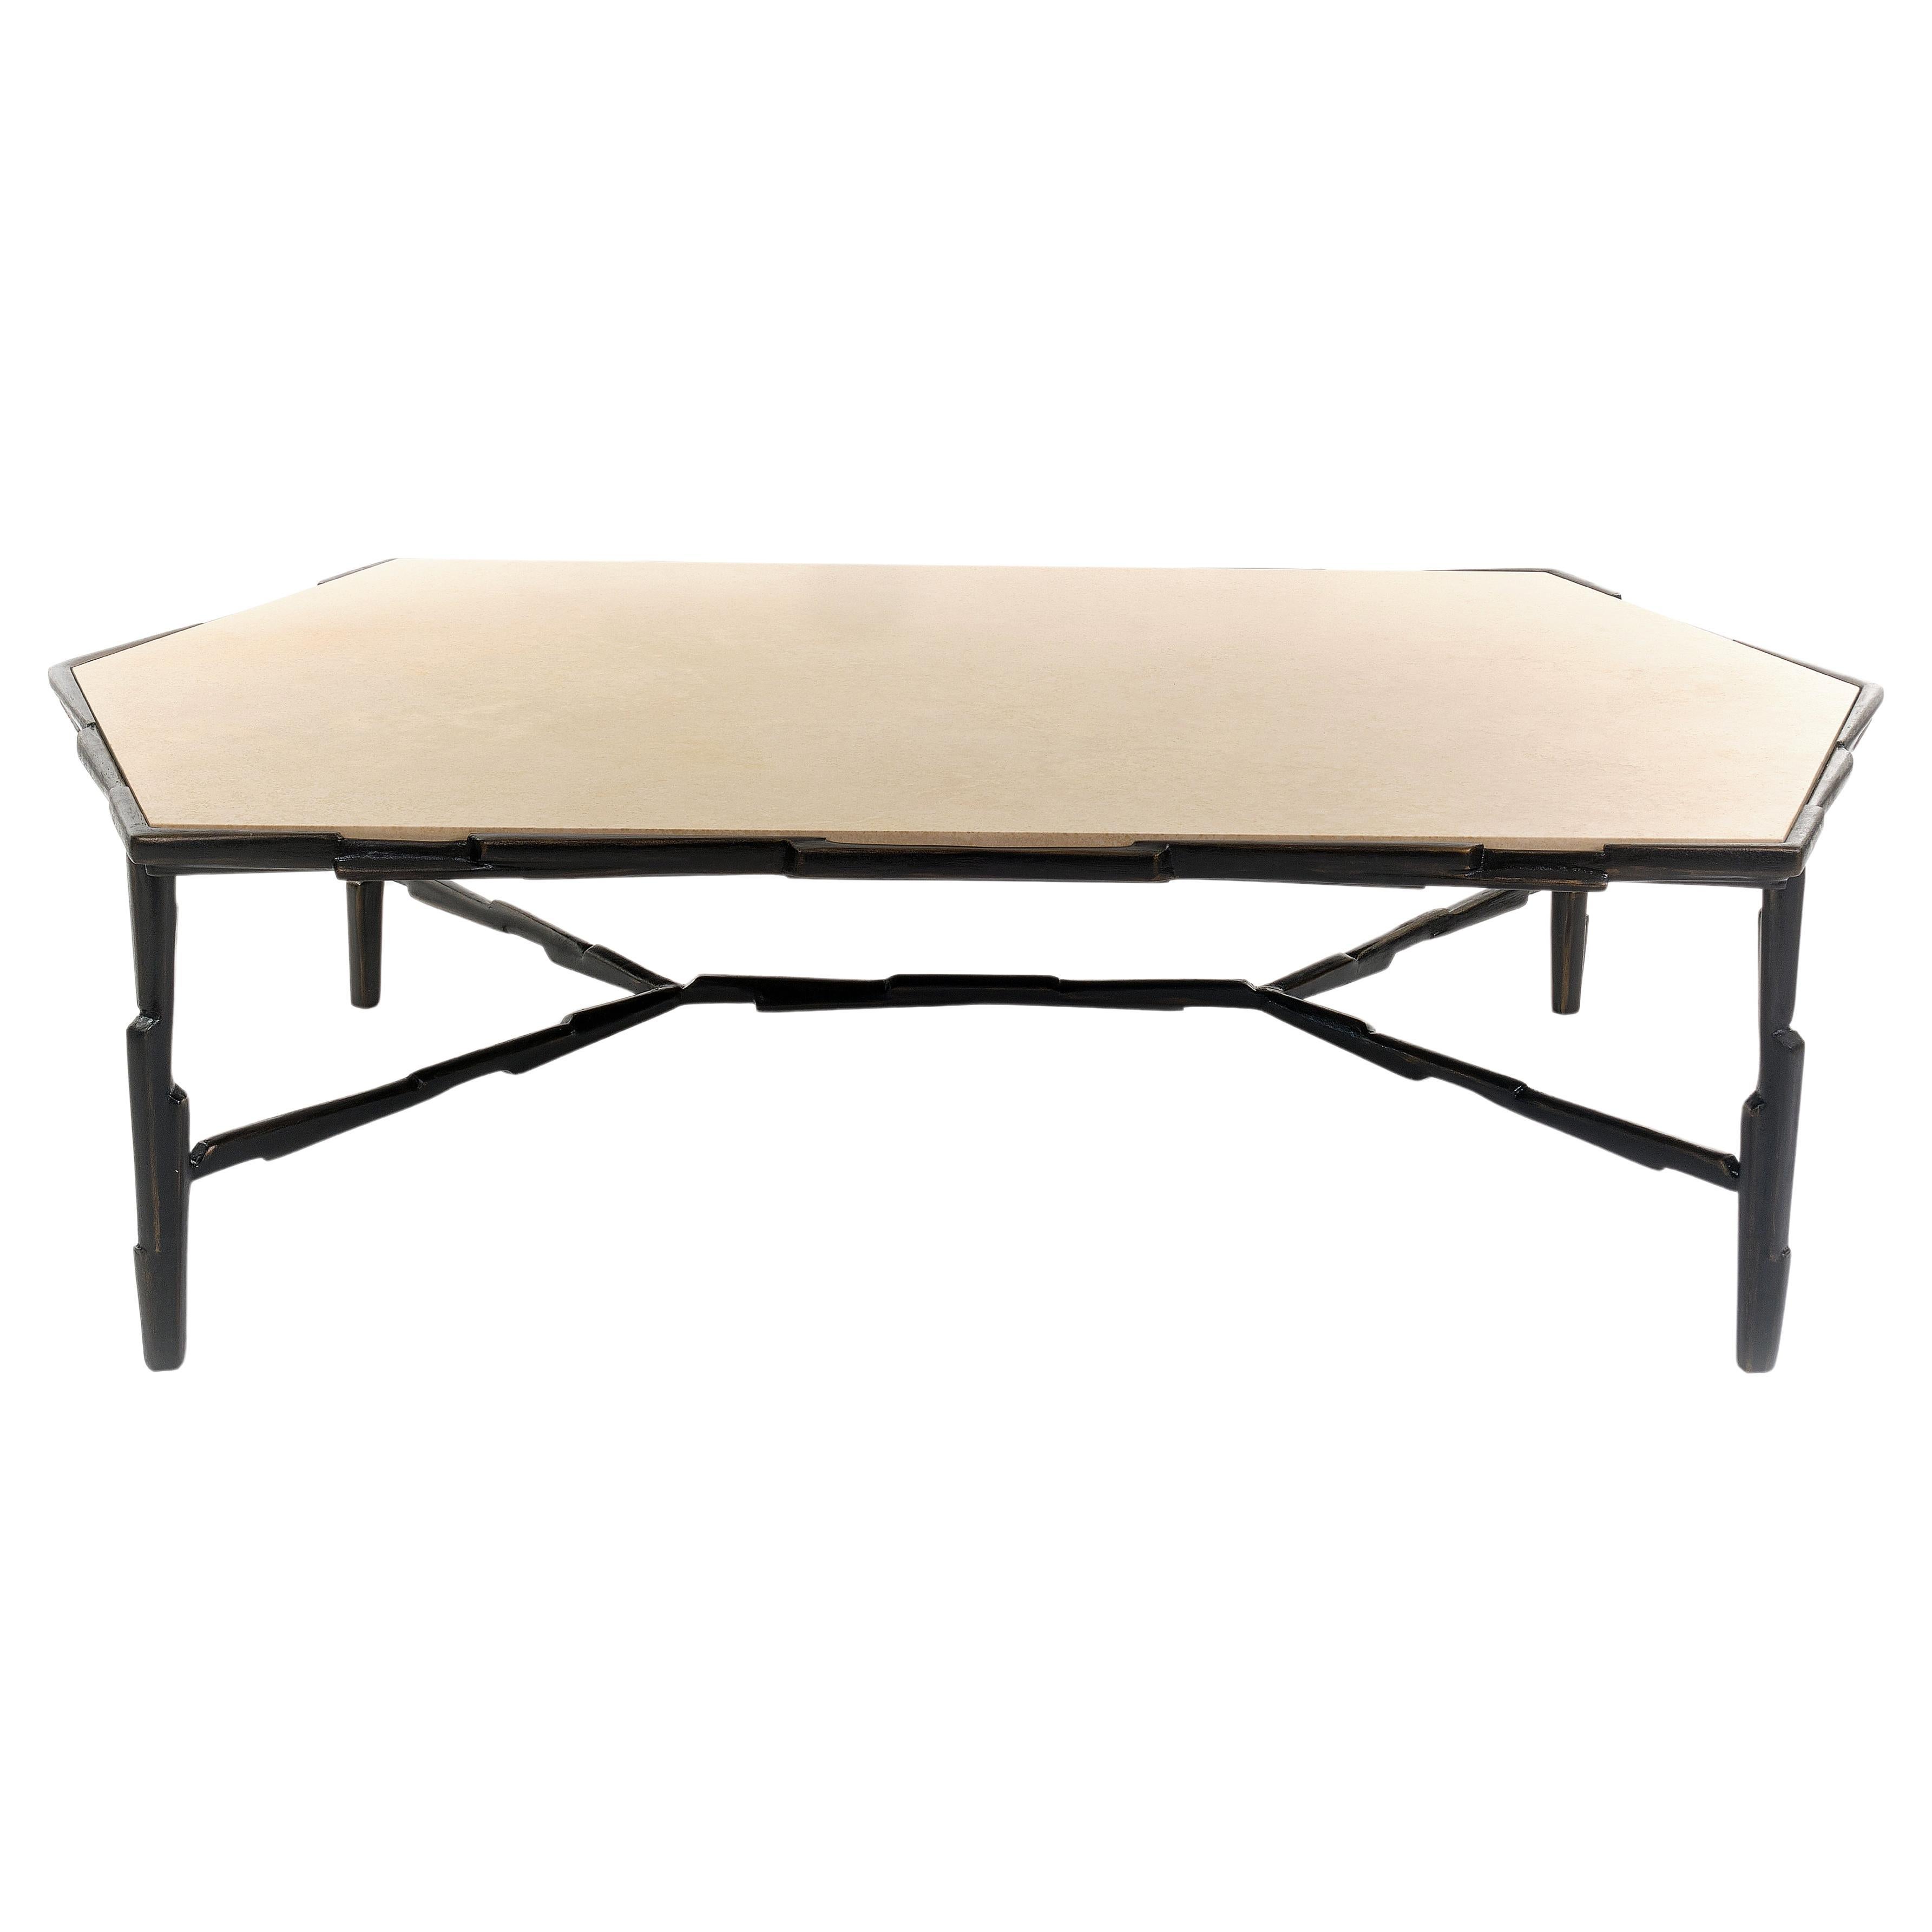 “Linea No.2”, Limited Edition Coffee Table, Bronze Plaster Finish, Benediko For Sale